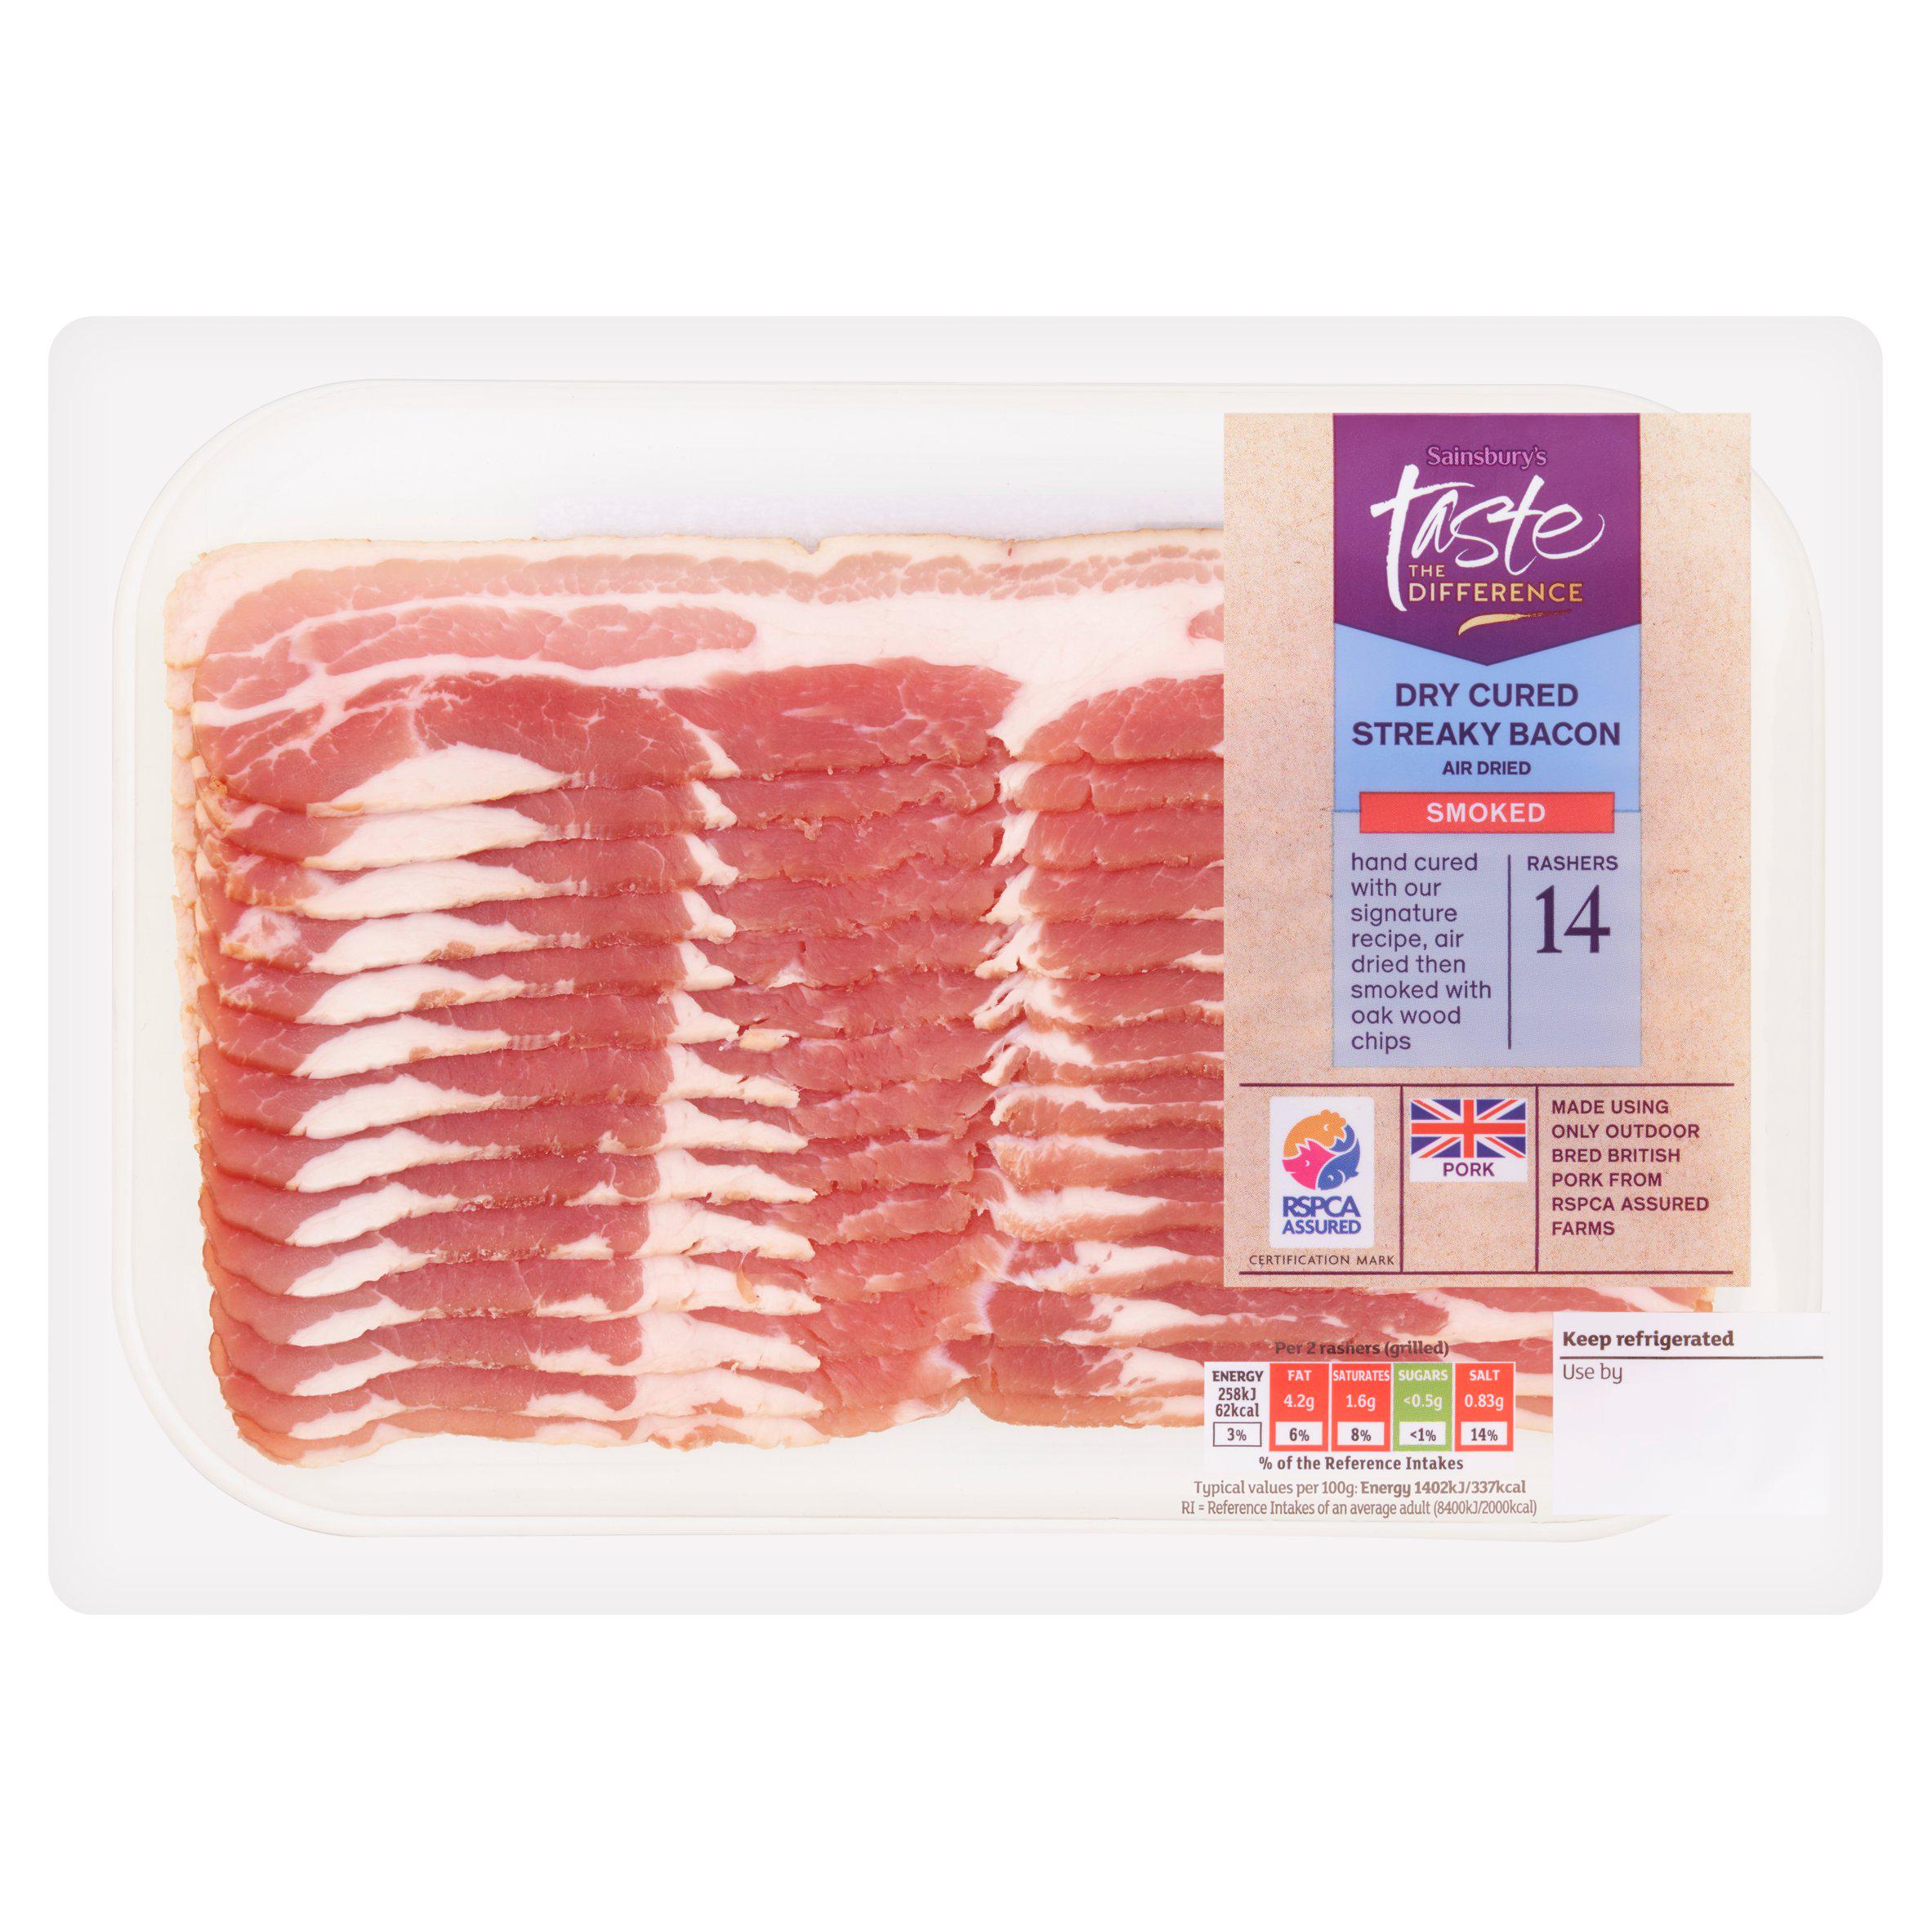 Sainsbury's Smoked Air Dried Streaky Bacon Rashers, Taste the Difference x14 220g